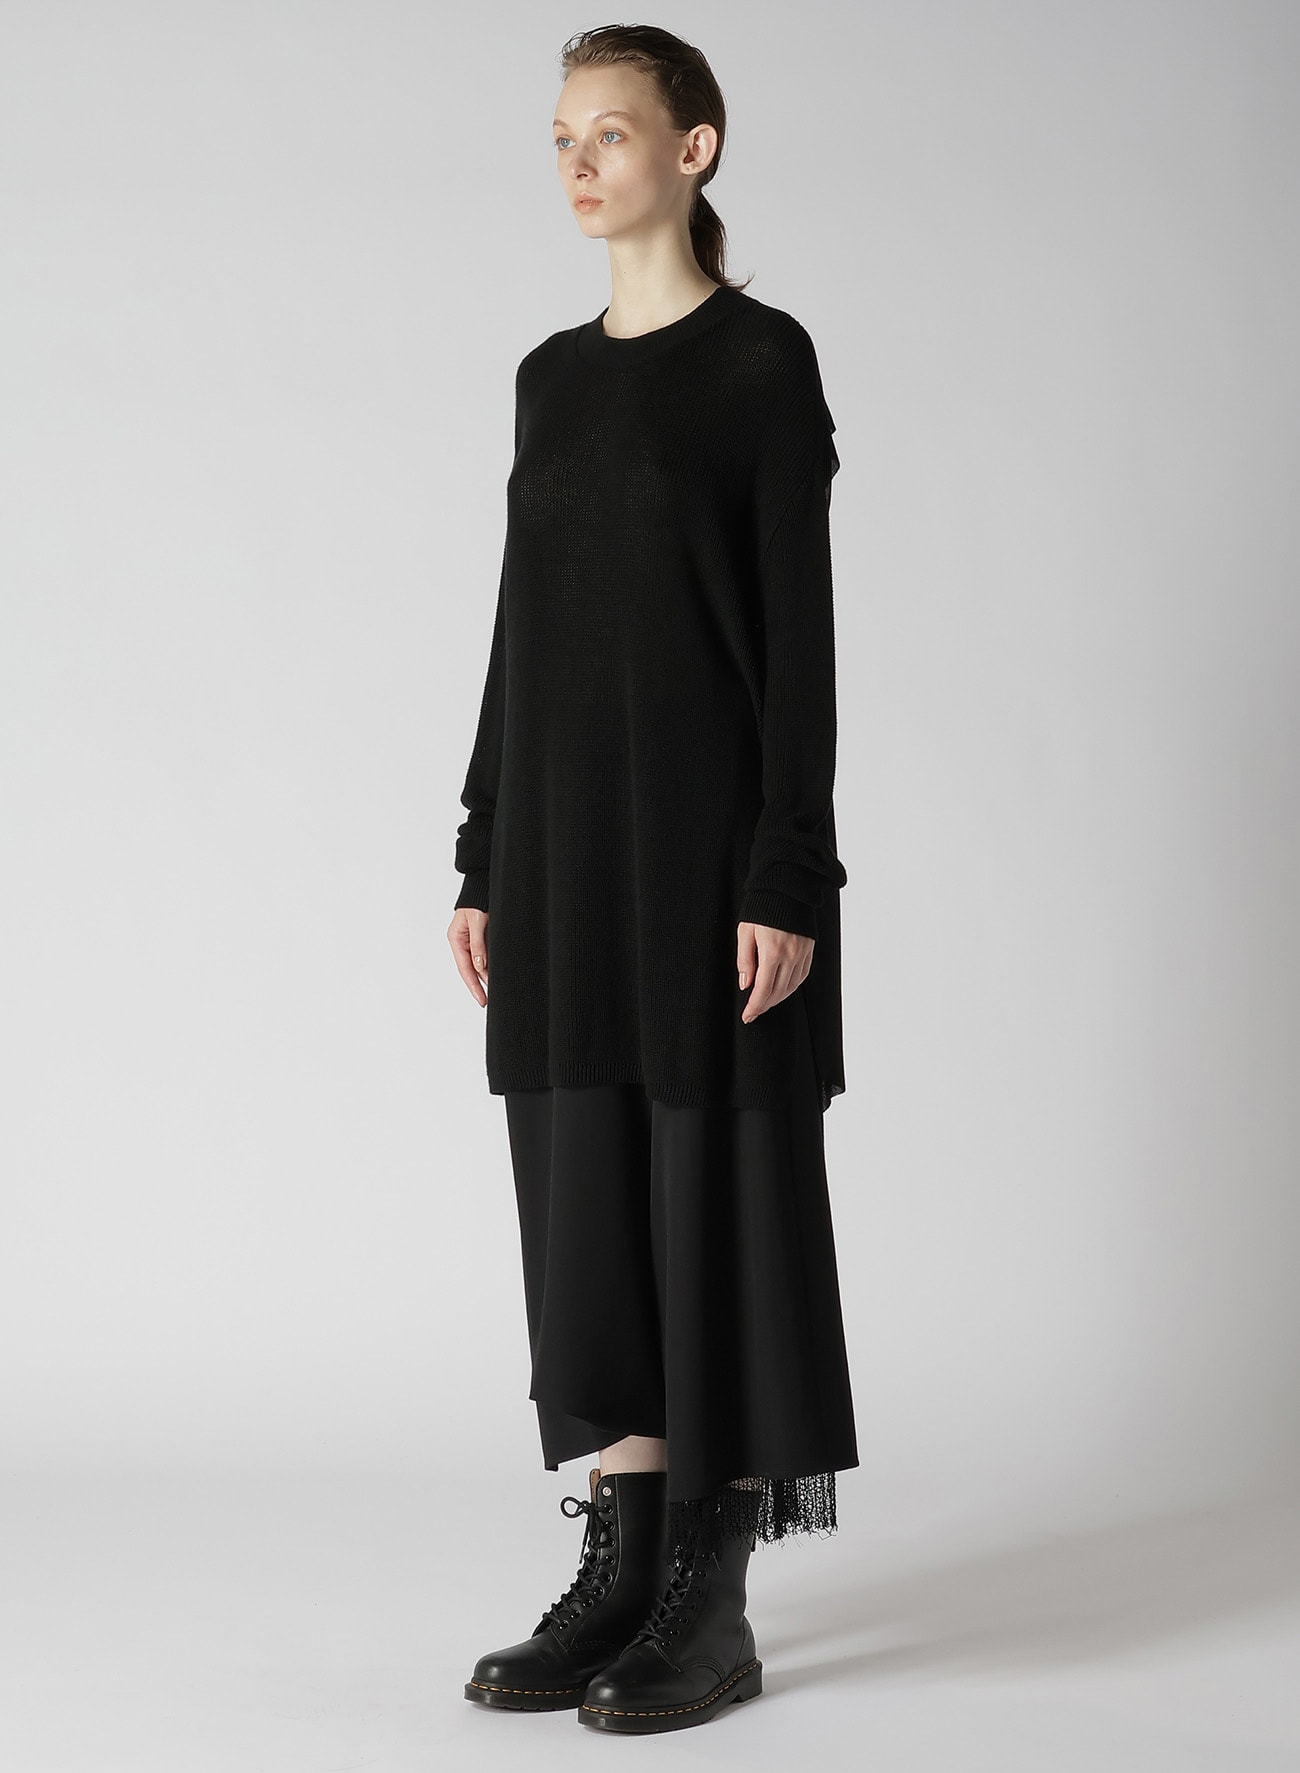 COTTON BREND BACK DRAPE LONG SLEEVE KNIT PULLOVER(S Black): Y's 